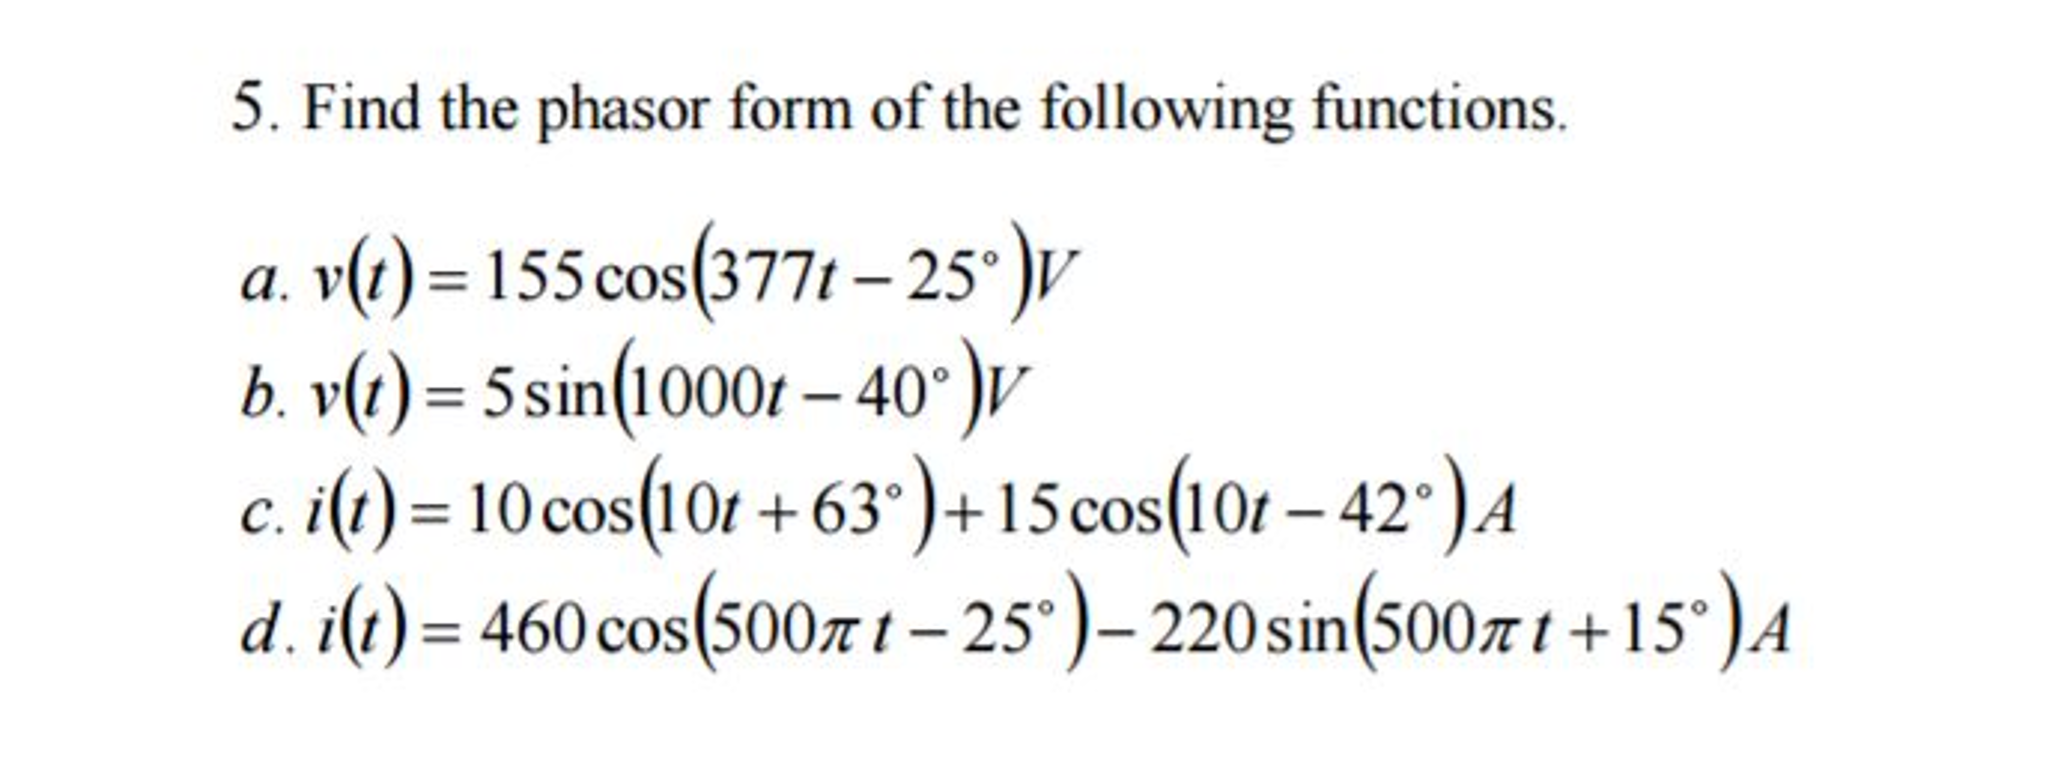 solved-find-the-phasor-form-of-the-following-functions-chegg